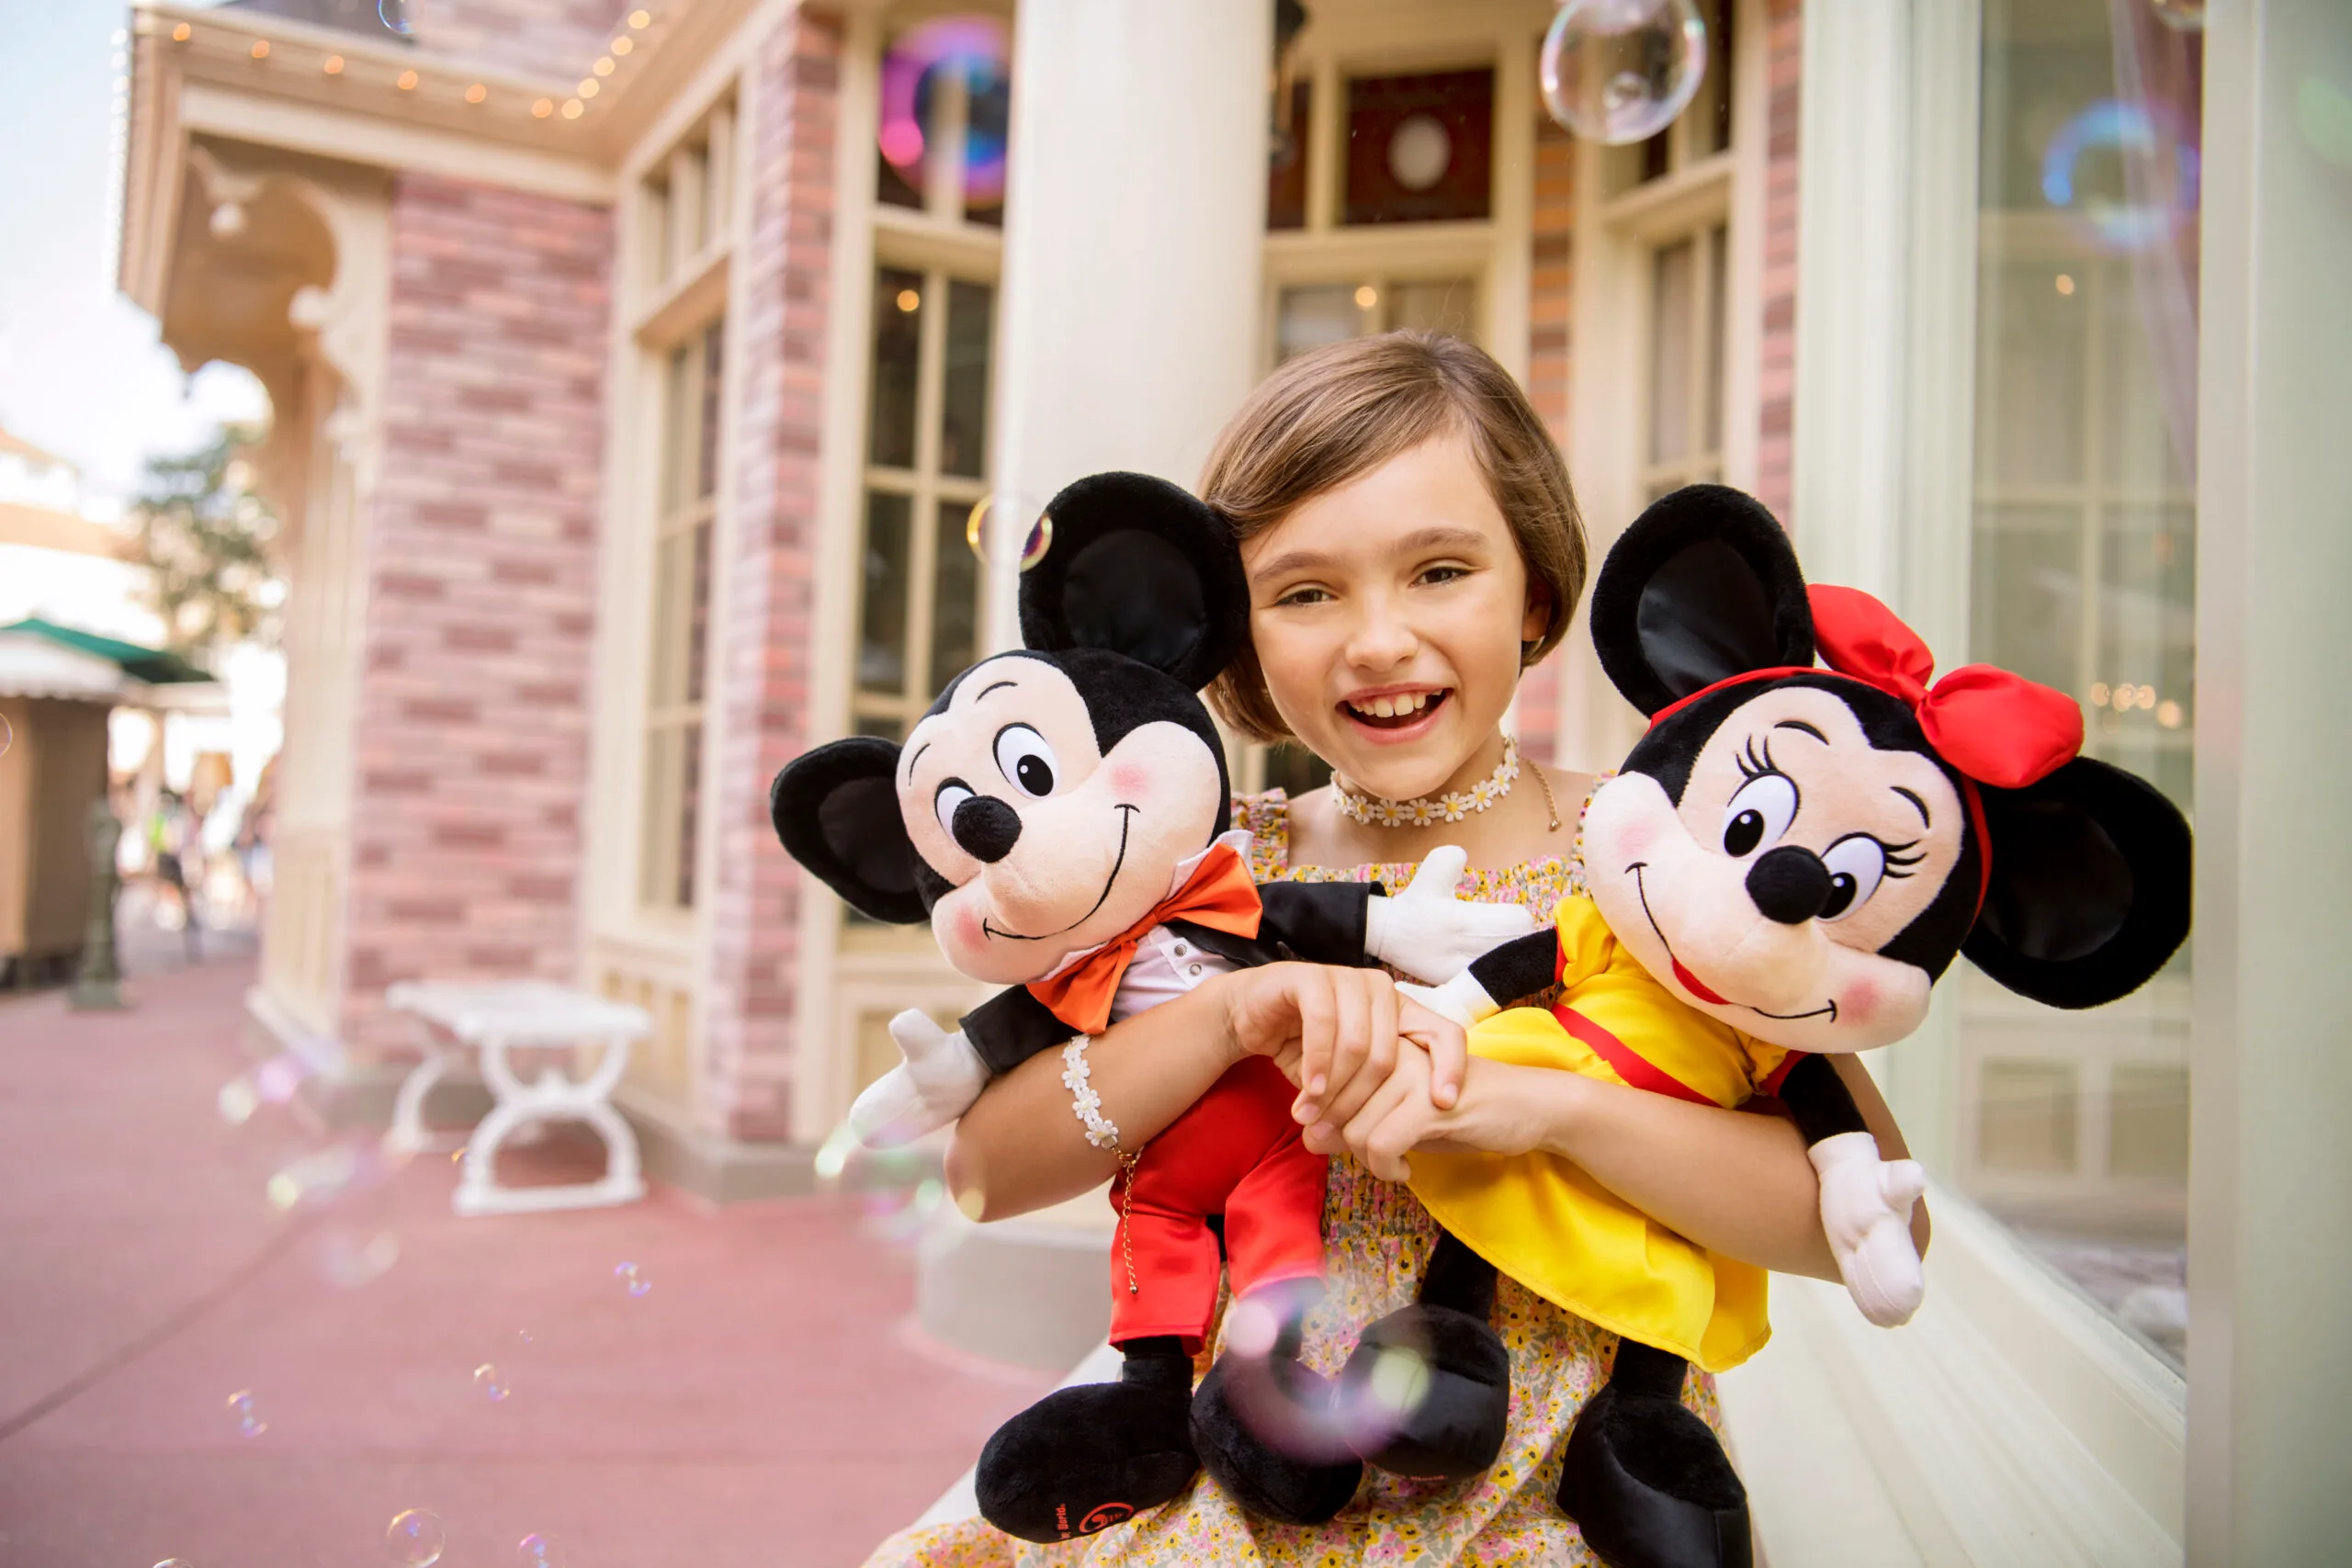 Little girl with Mickey and Minnie dolls